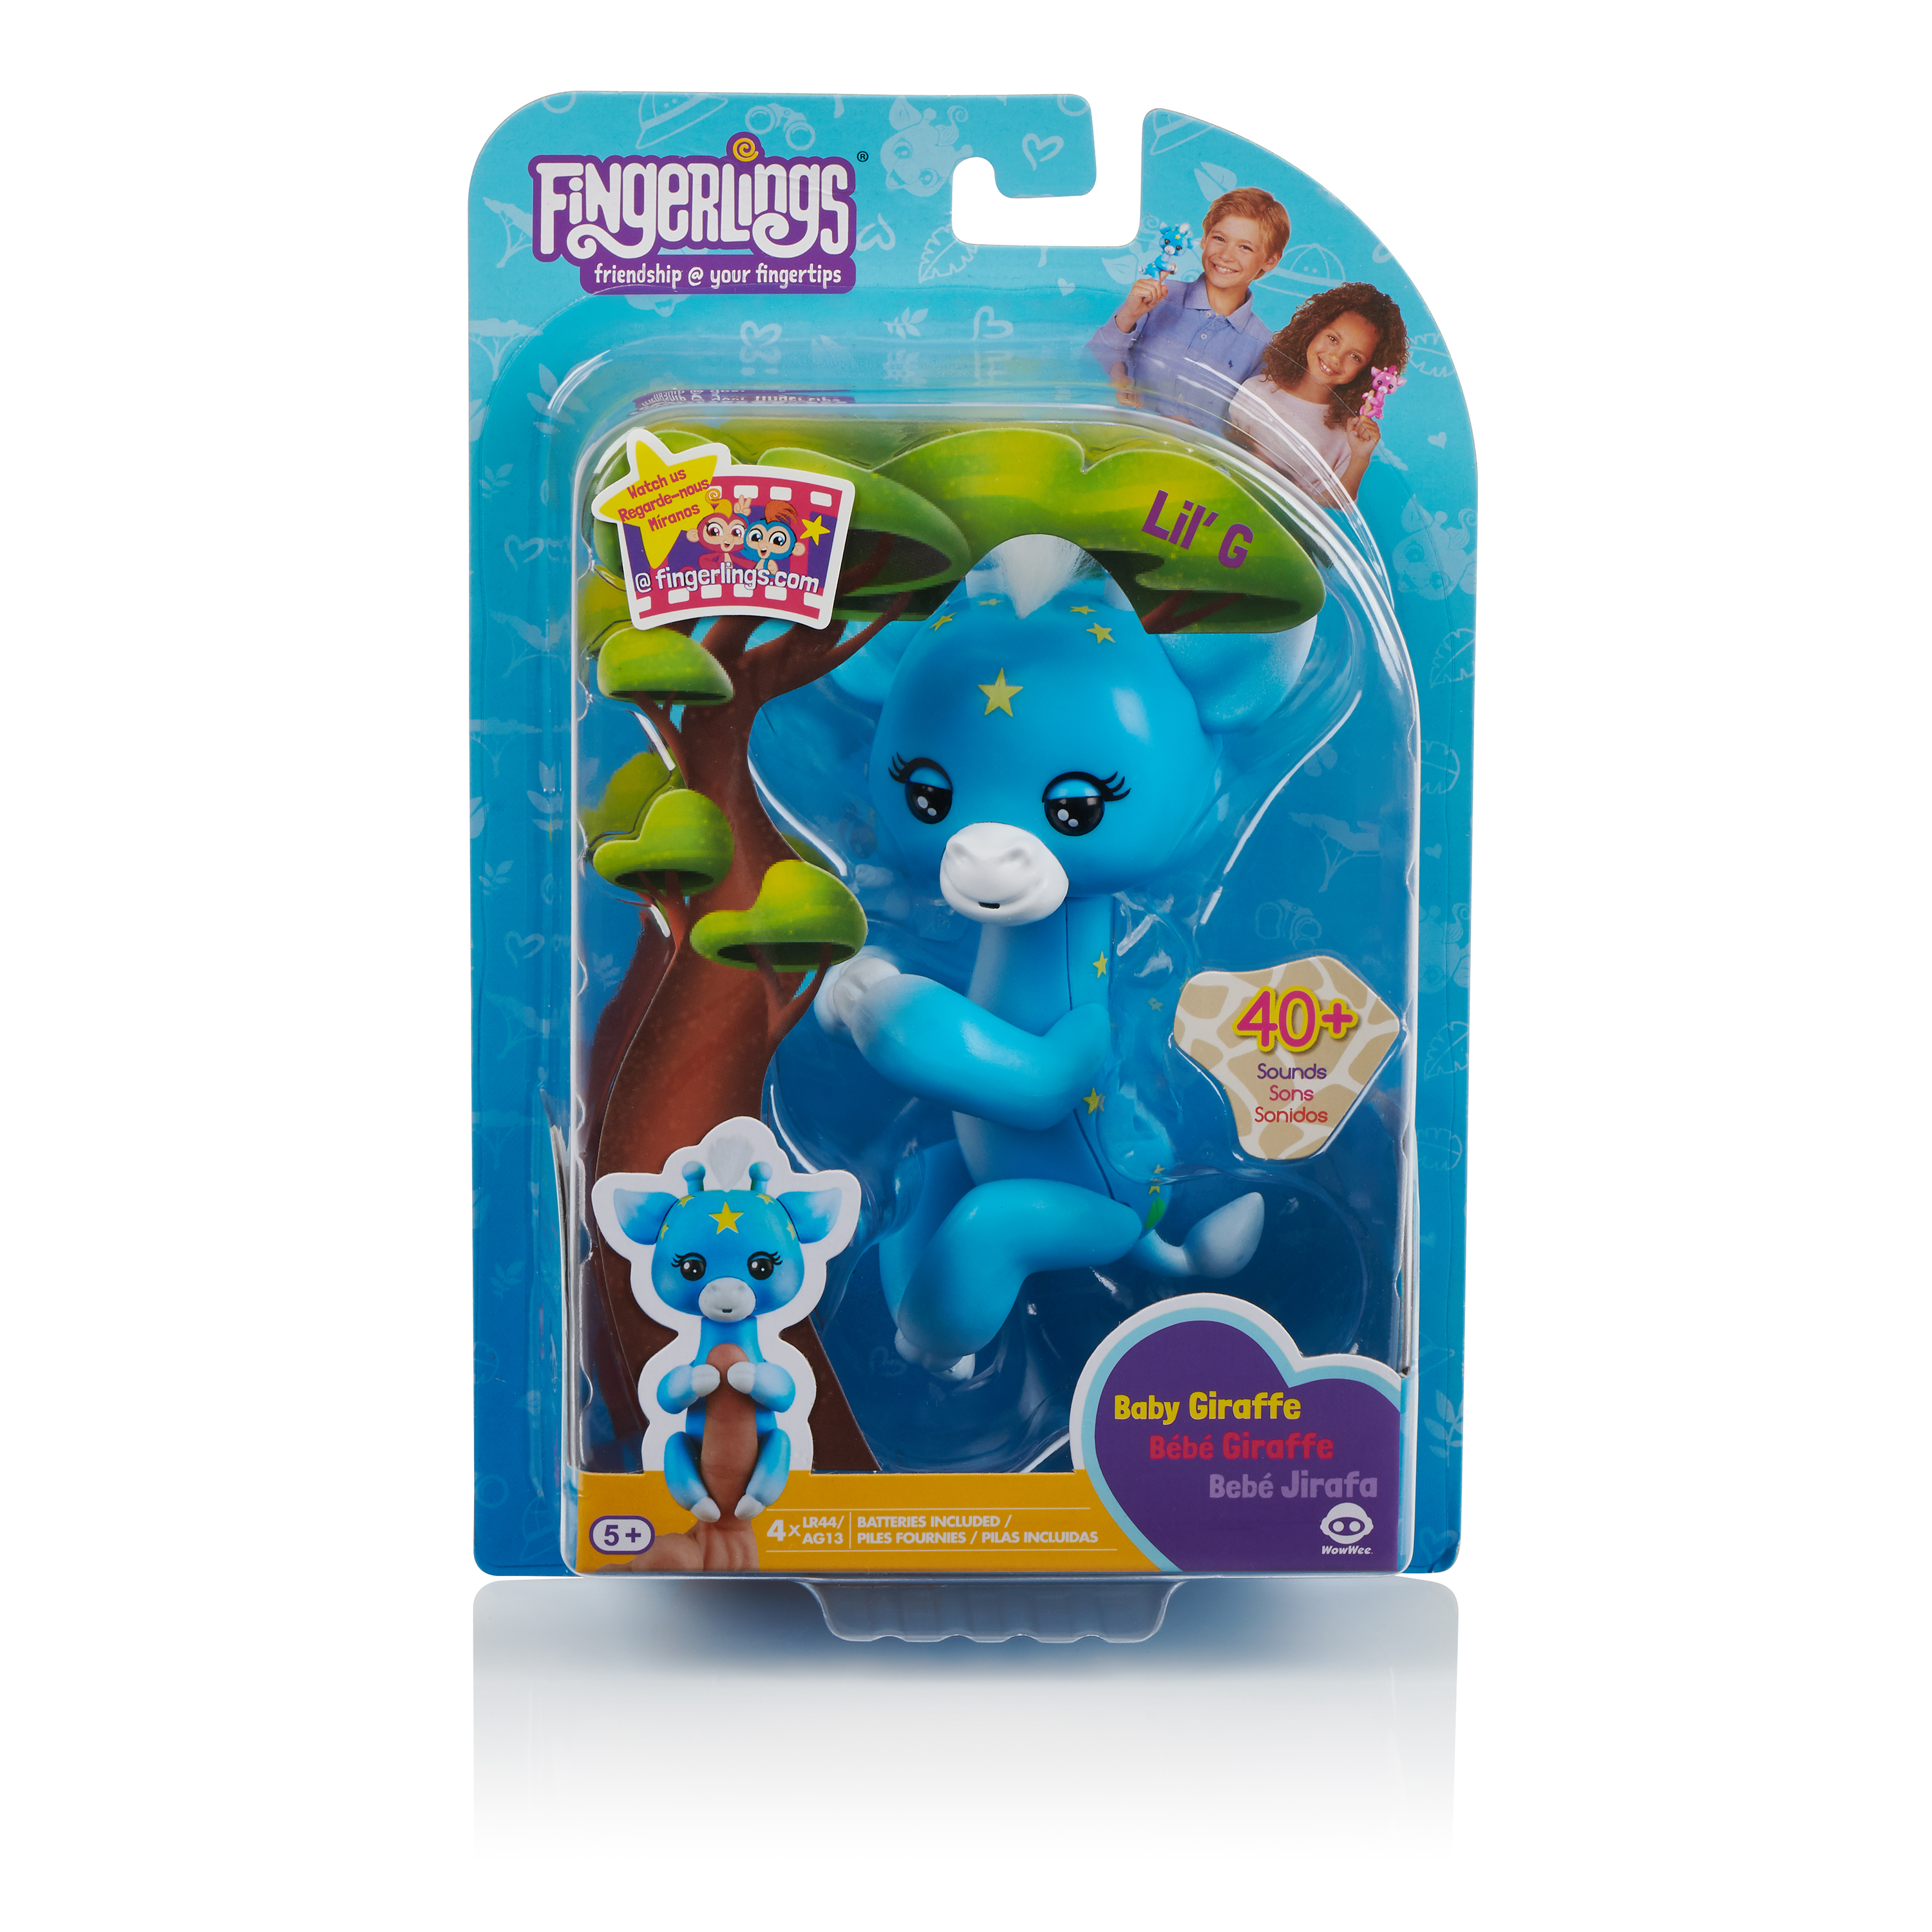 Fingerlings - Glitter Dragon - Tara (Blue with Purple) - Interactive Baby Collectible Pet - By WowWee - image 1 of 9